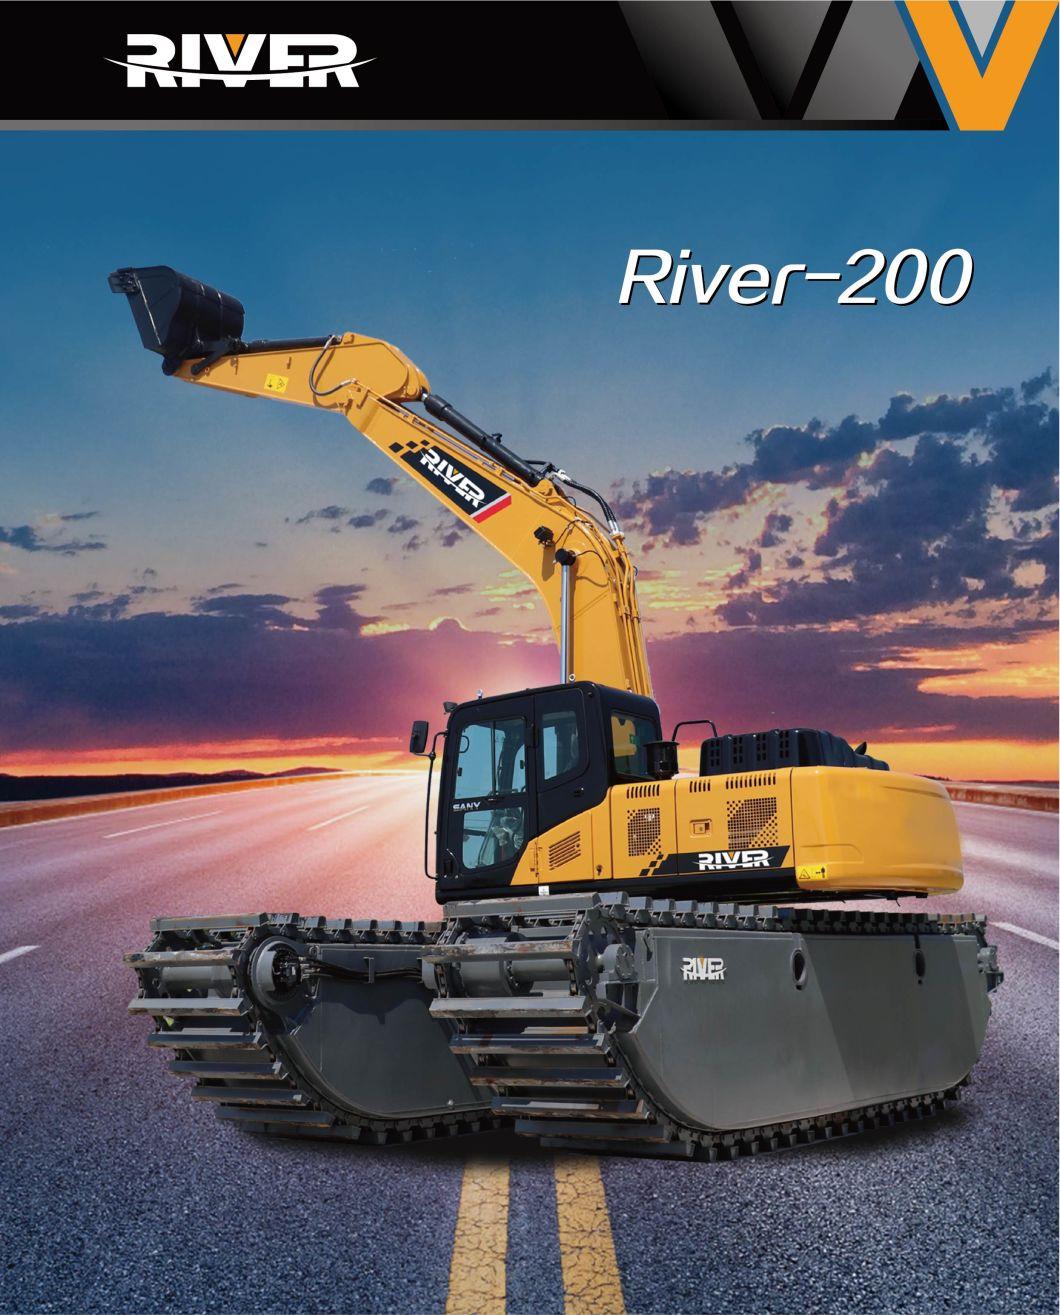 Best Quality Second Hand 320c Swamp Buggy Amphibious Excavator with New Pontoon Undercarriage